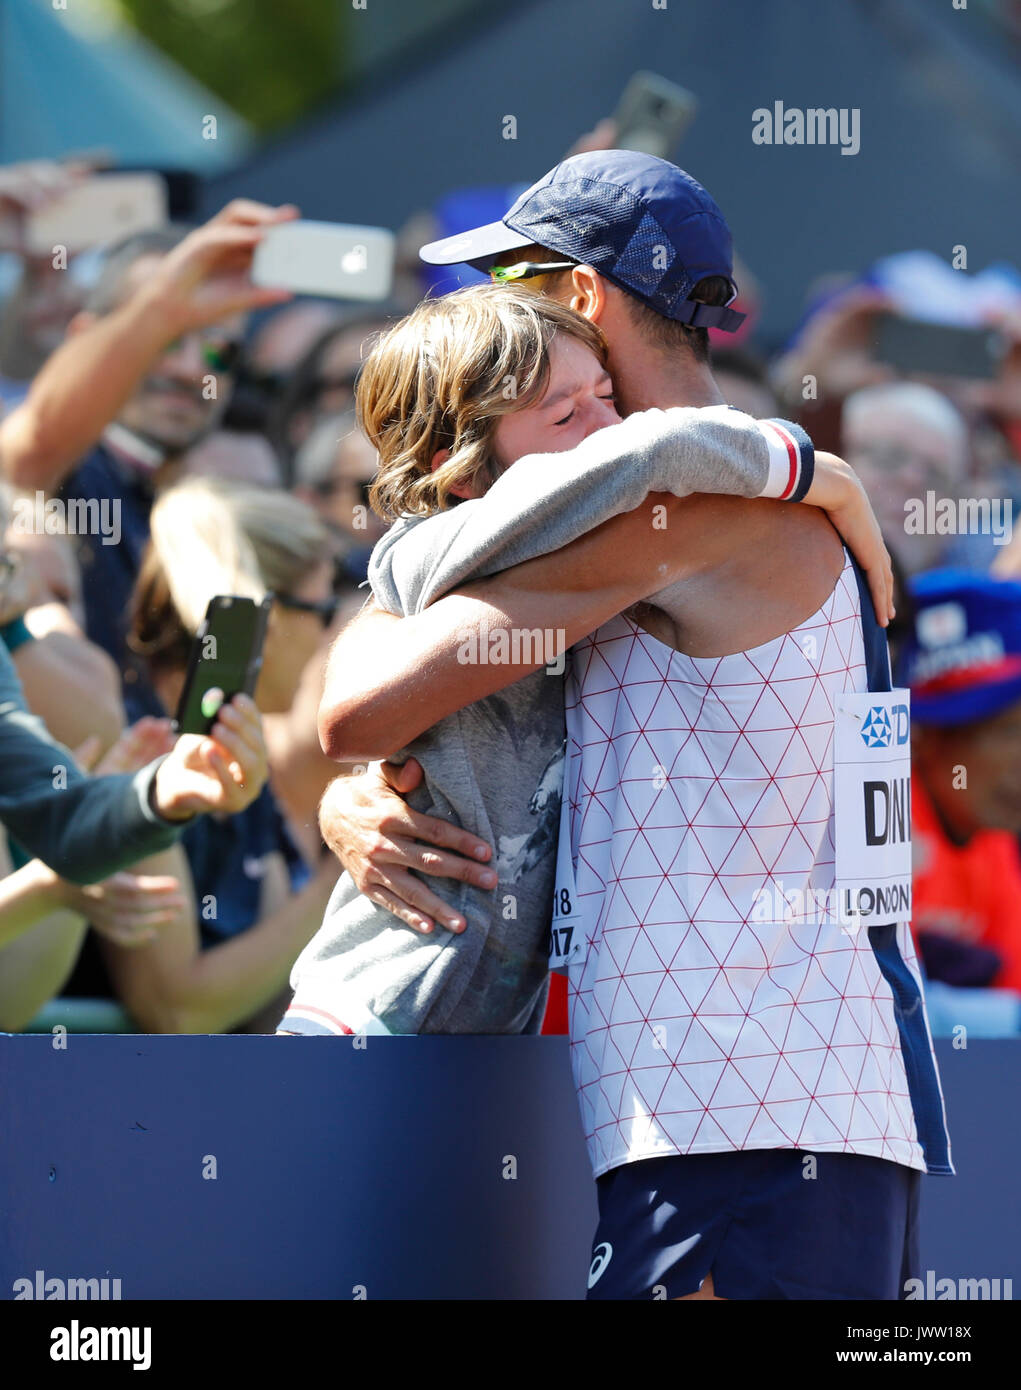 London, UK. 13th Aug, 2017. Yohann Diniz (R) of France celebrates after the men's 50km race walk on Day 10 at the IAAF World Championships 2017 in London, Britain on Aug. 13, 2017. Credit: Han Yan/Xinhua/Alamy Live News Stock Photo